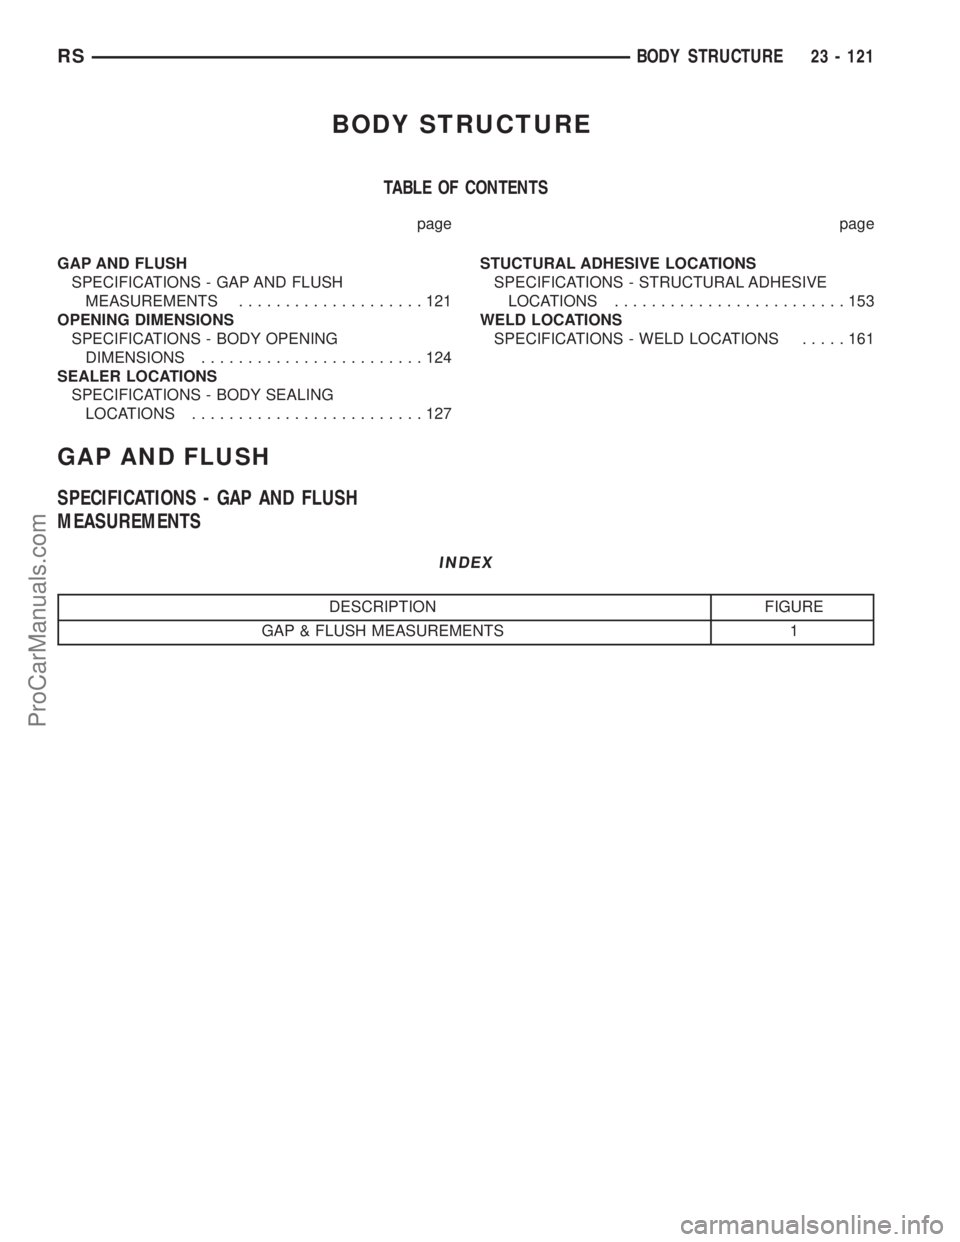 DODGE TOWN AND COUNTRY 2003  Service Manual BODY STRUCTURE
TABLE OF CONTENTS
page page
GAP AND FLUSH
SPECIFICATIONS - GAP AND FLUSH
MEASUREMENTS....................121
OPENING DIMENSIONS
SPECIFICATIONS - BODY OPENING
DIMENSIONS.................